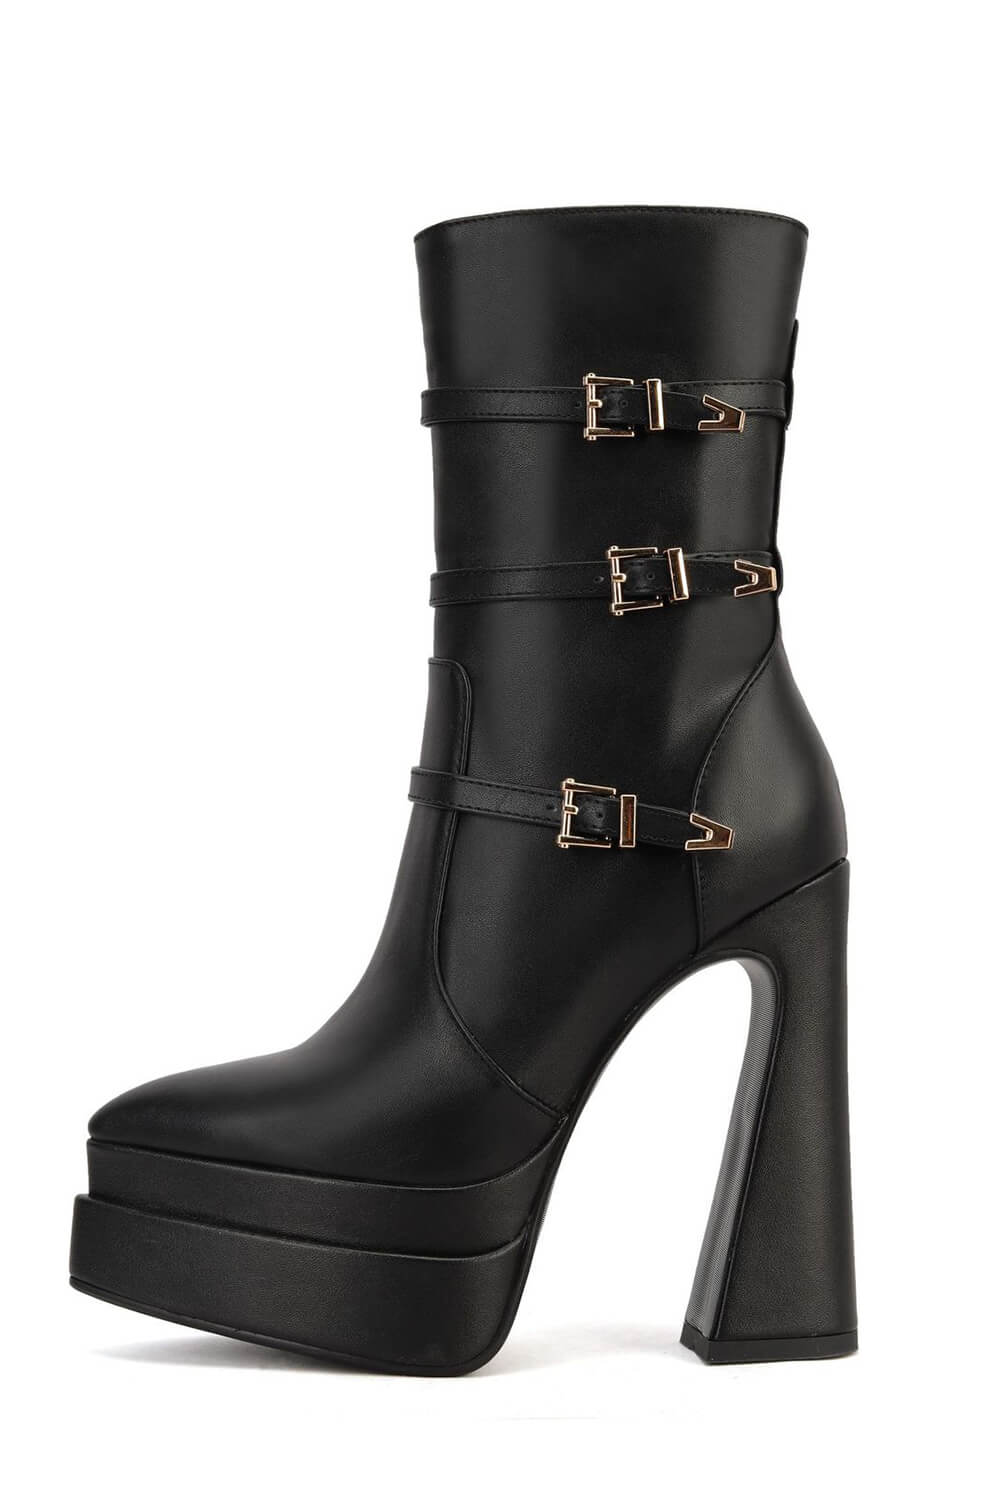 Black Faux Leather Double Platform Flared Block Pointy Ankle Boots With Triple Buckle Straps Detailing